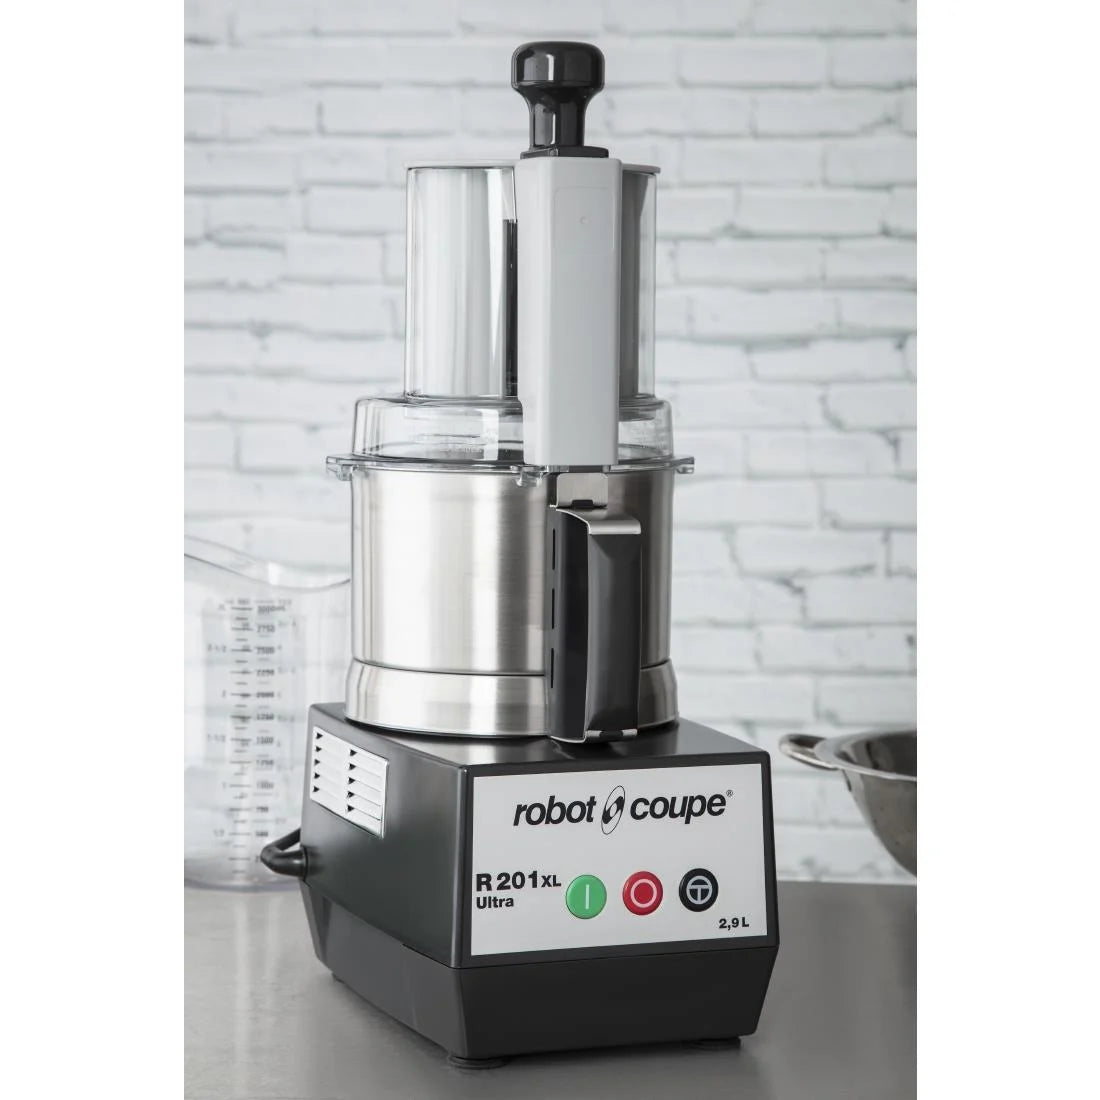 Robot Coupe Food Processor R201XL Ultra.Product Ref:00723.Model: R201XL. 🚚 3-5 Days Delivery